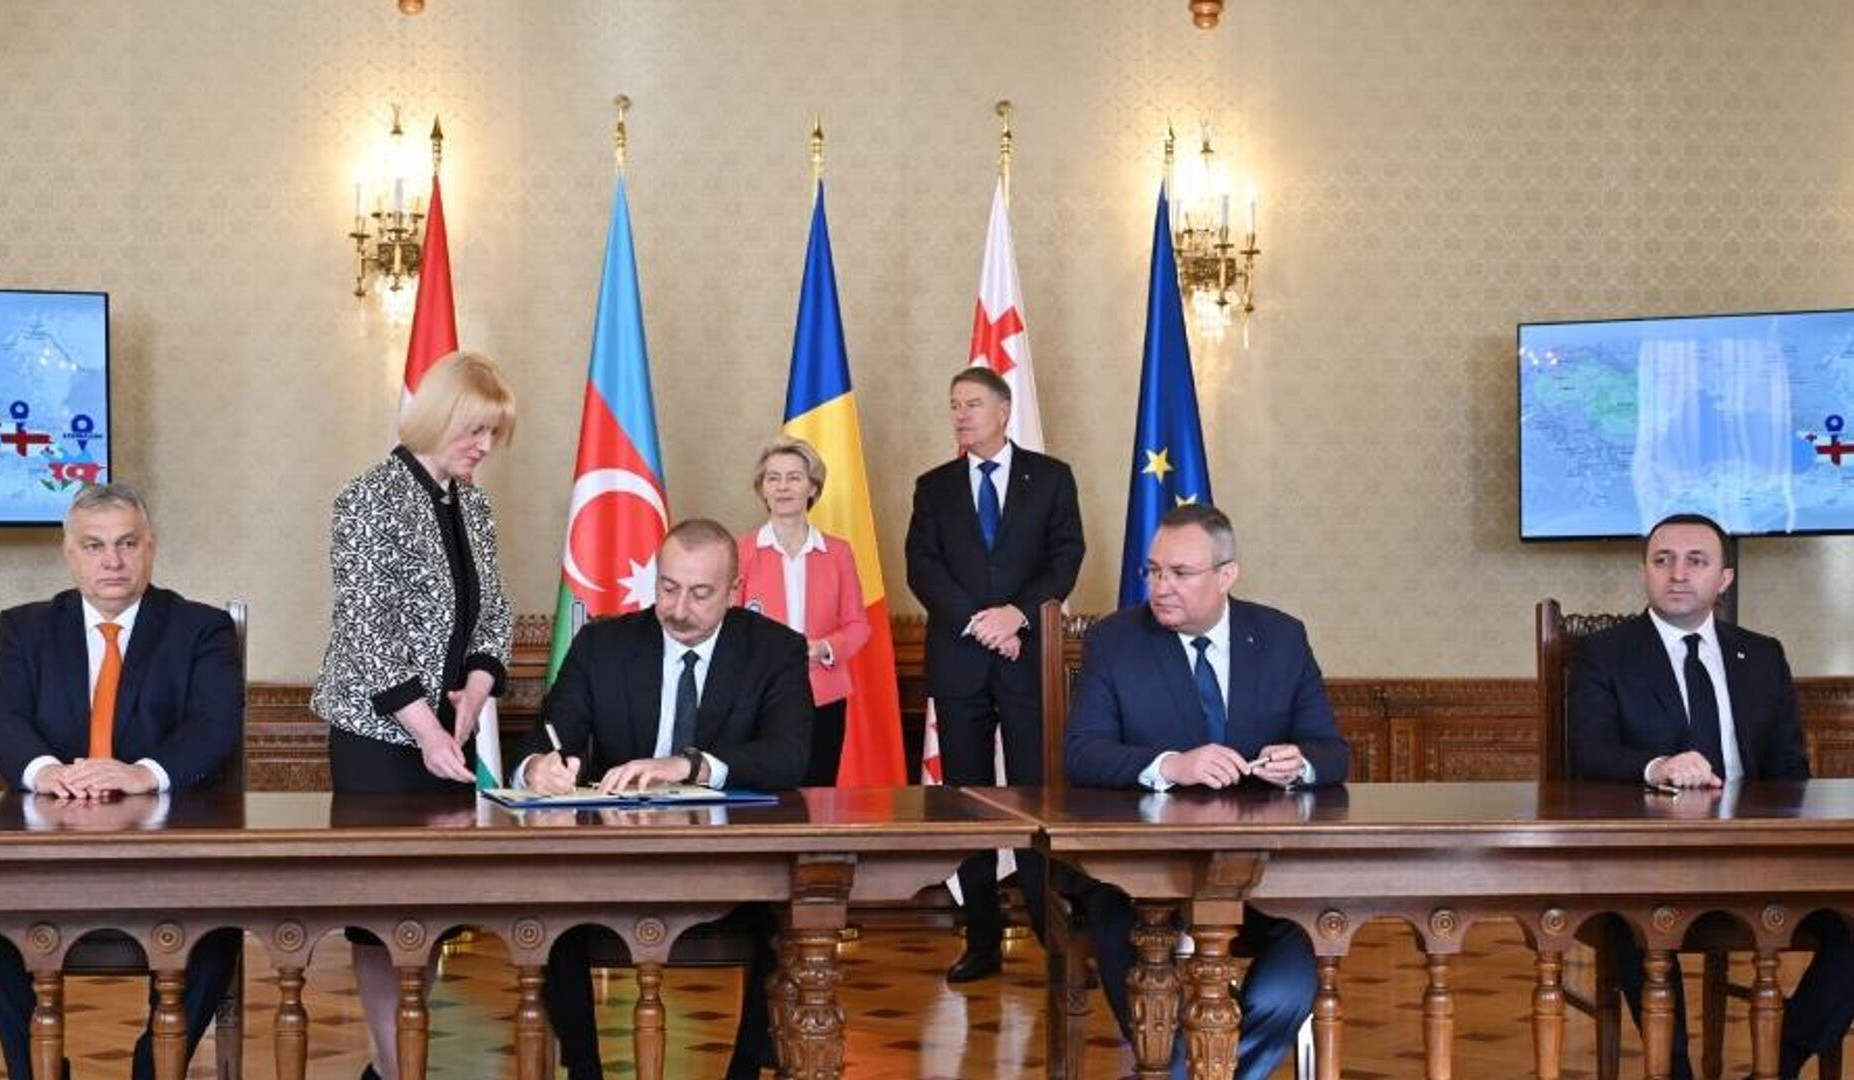 Agreement signed in Bucharest on transfer of electricity from Azerbaijan to Europe through territory of Georgia